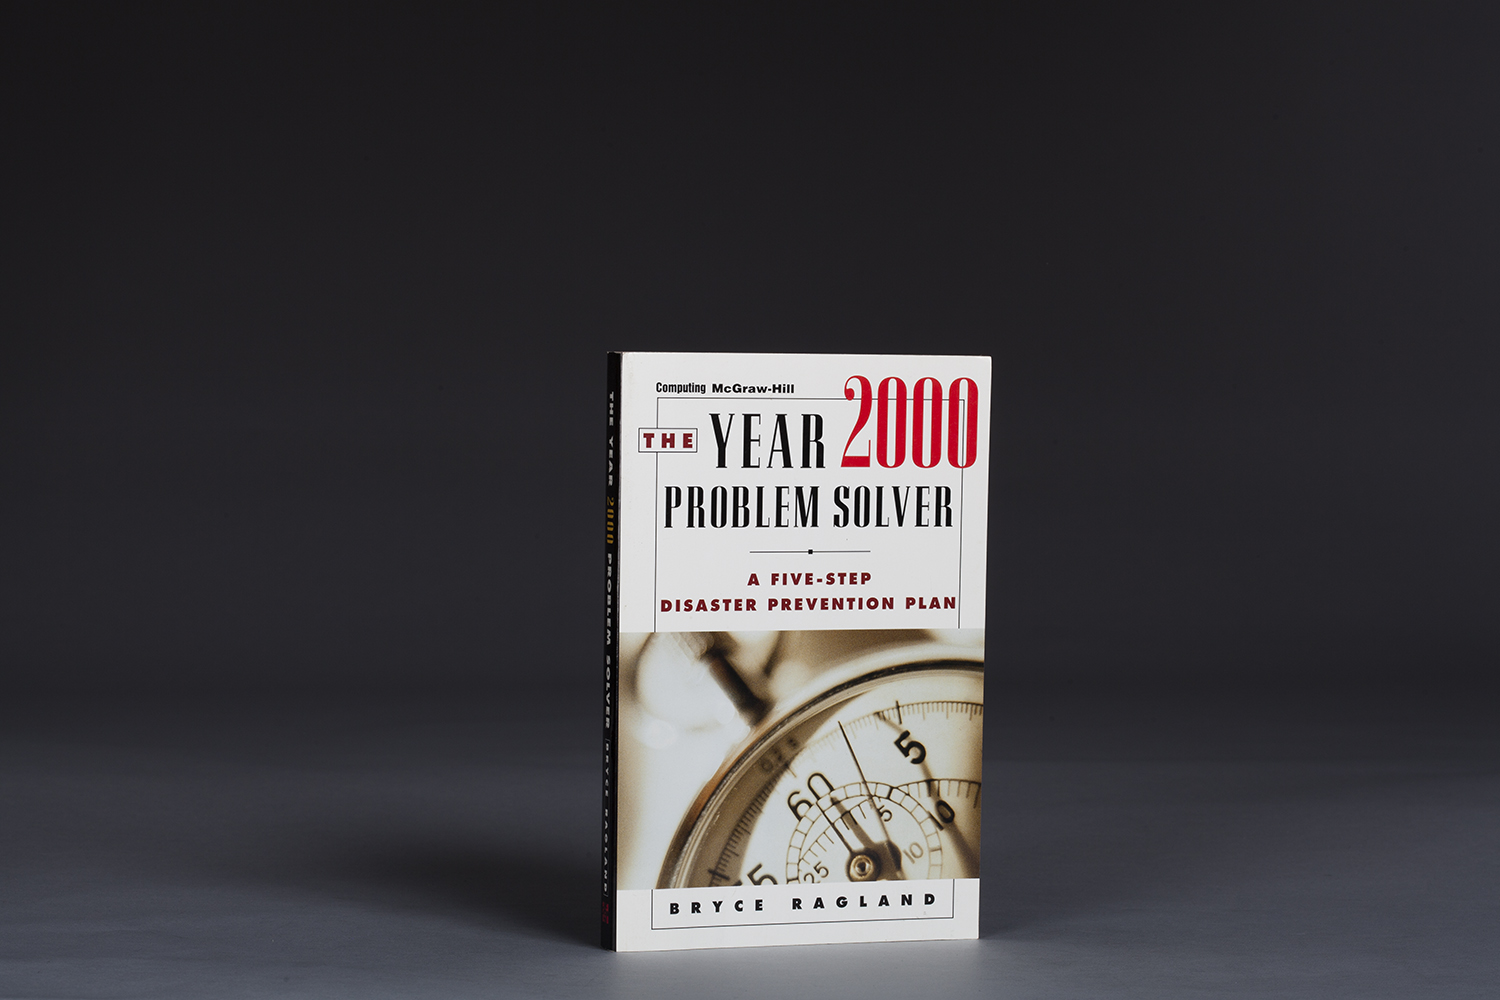 The Year 2000 Problem Solver - 0479 Cover.jpg